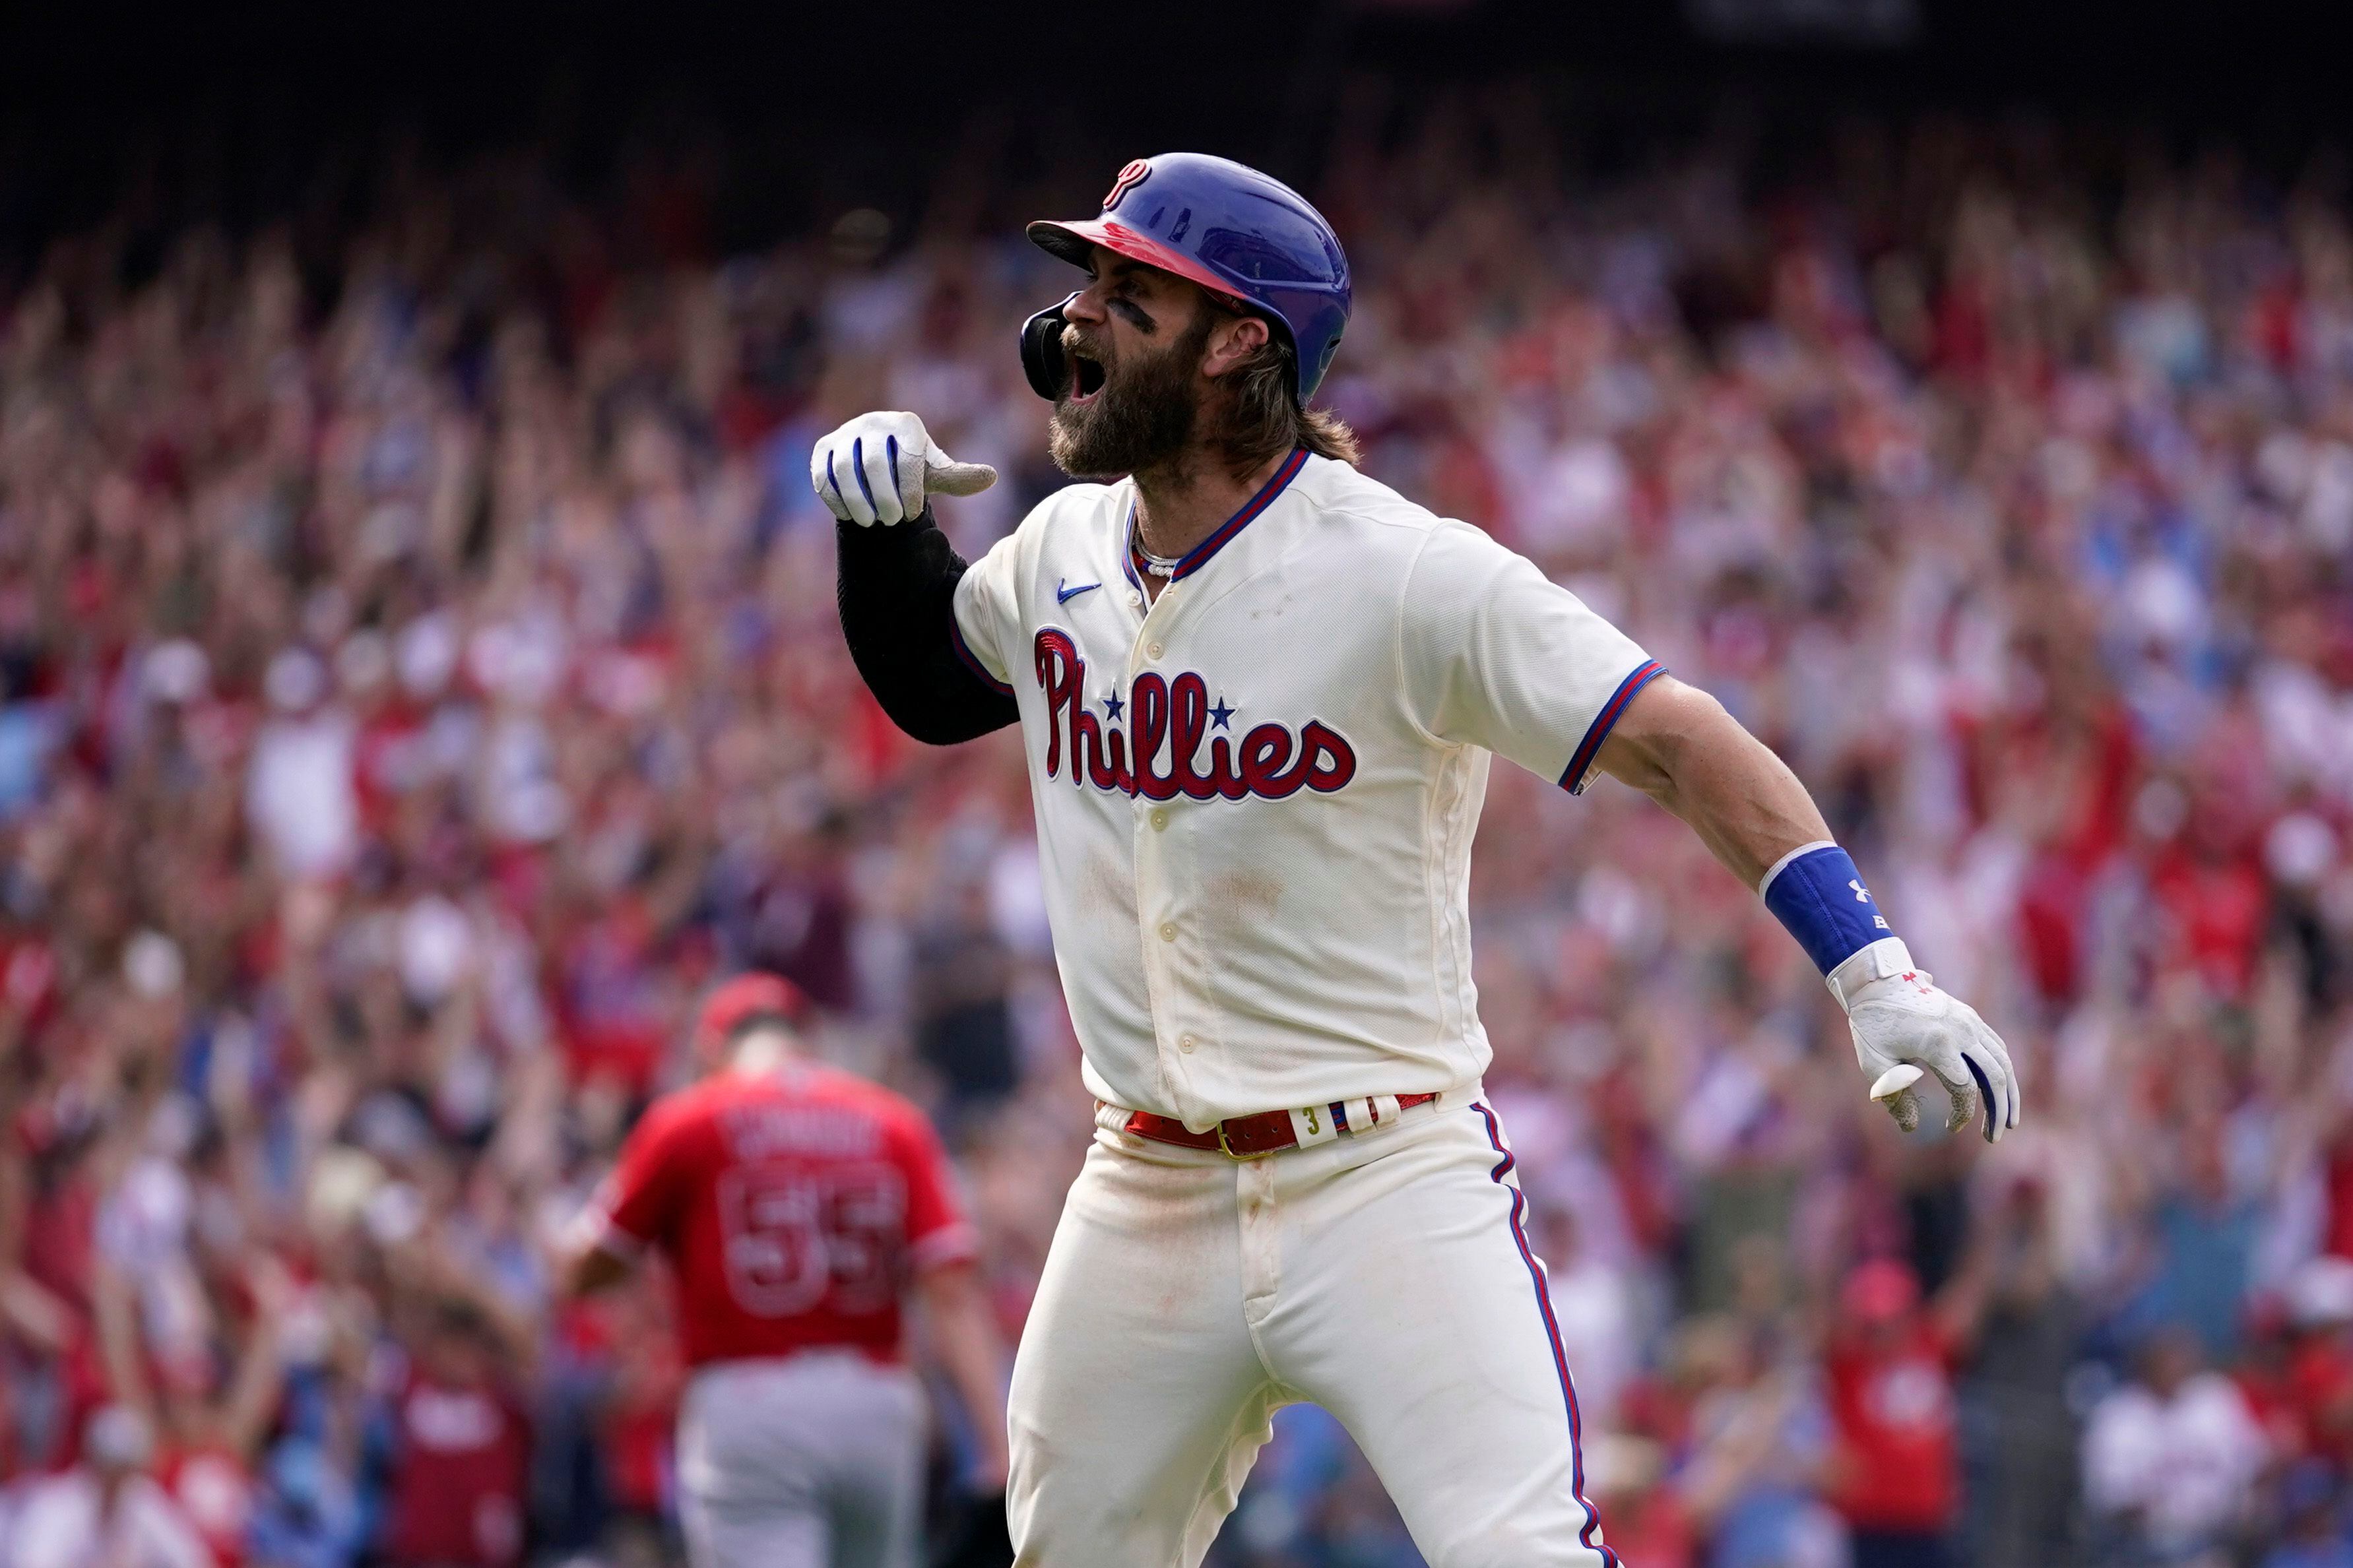 Moore: Bryce Harper shows he's thinking about the big picture